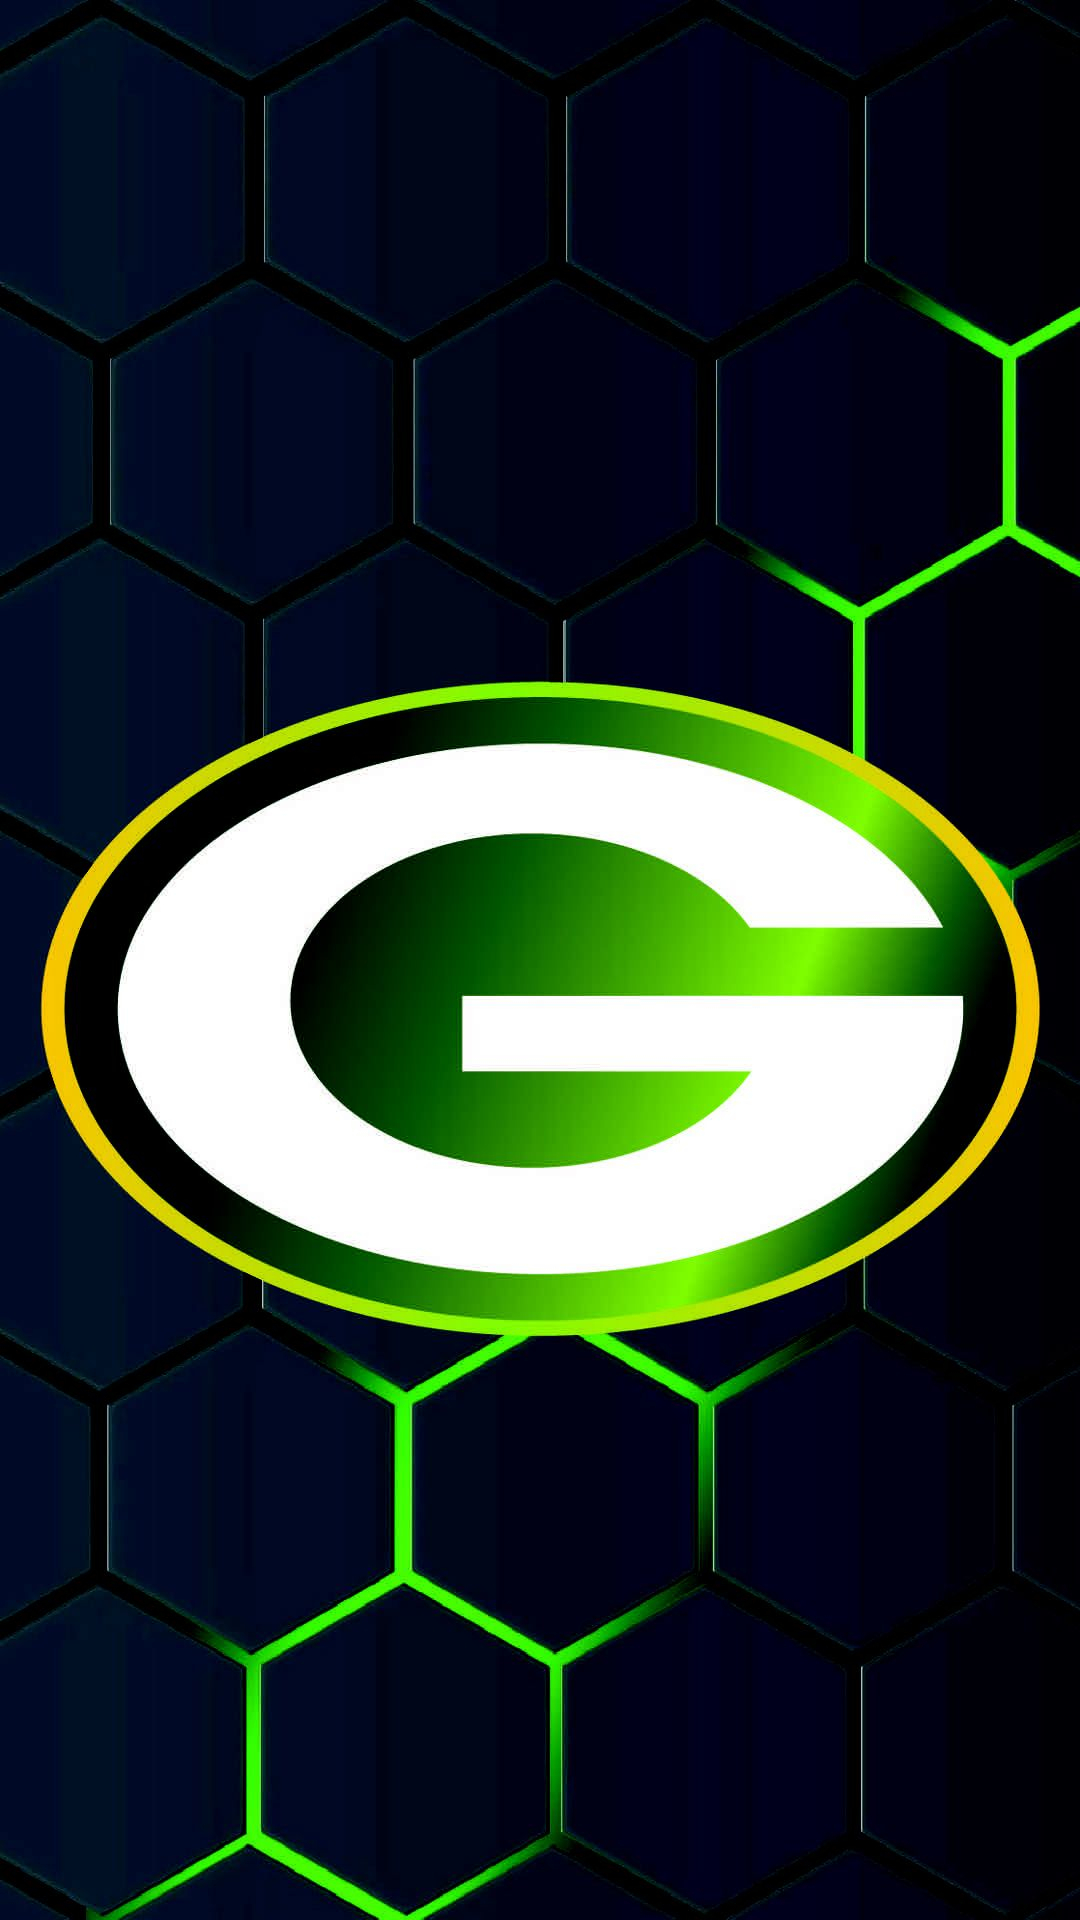 1080x1920 Green Bay Packers | Green bay packers wallpaper, Green bay packers, Green bay packers players